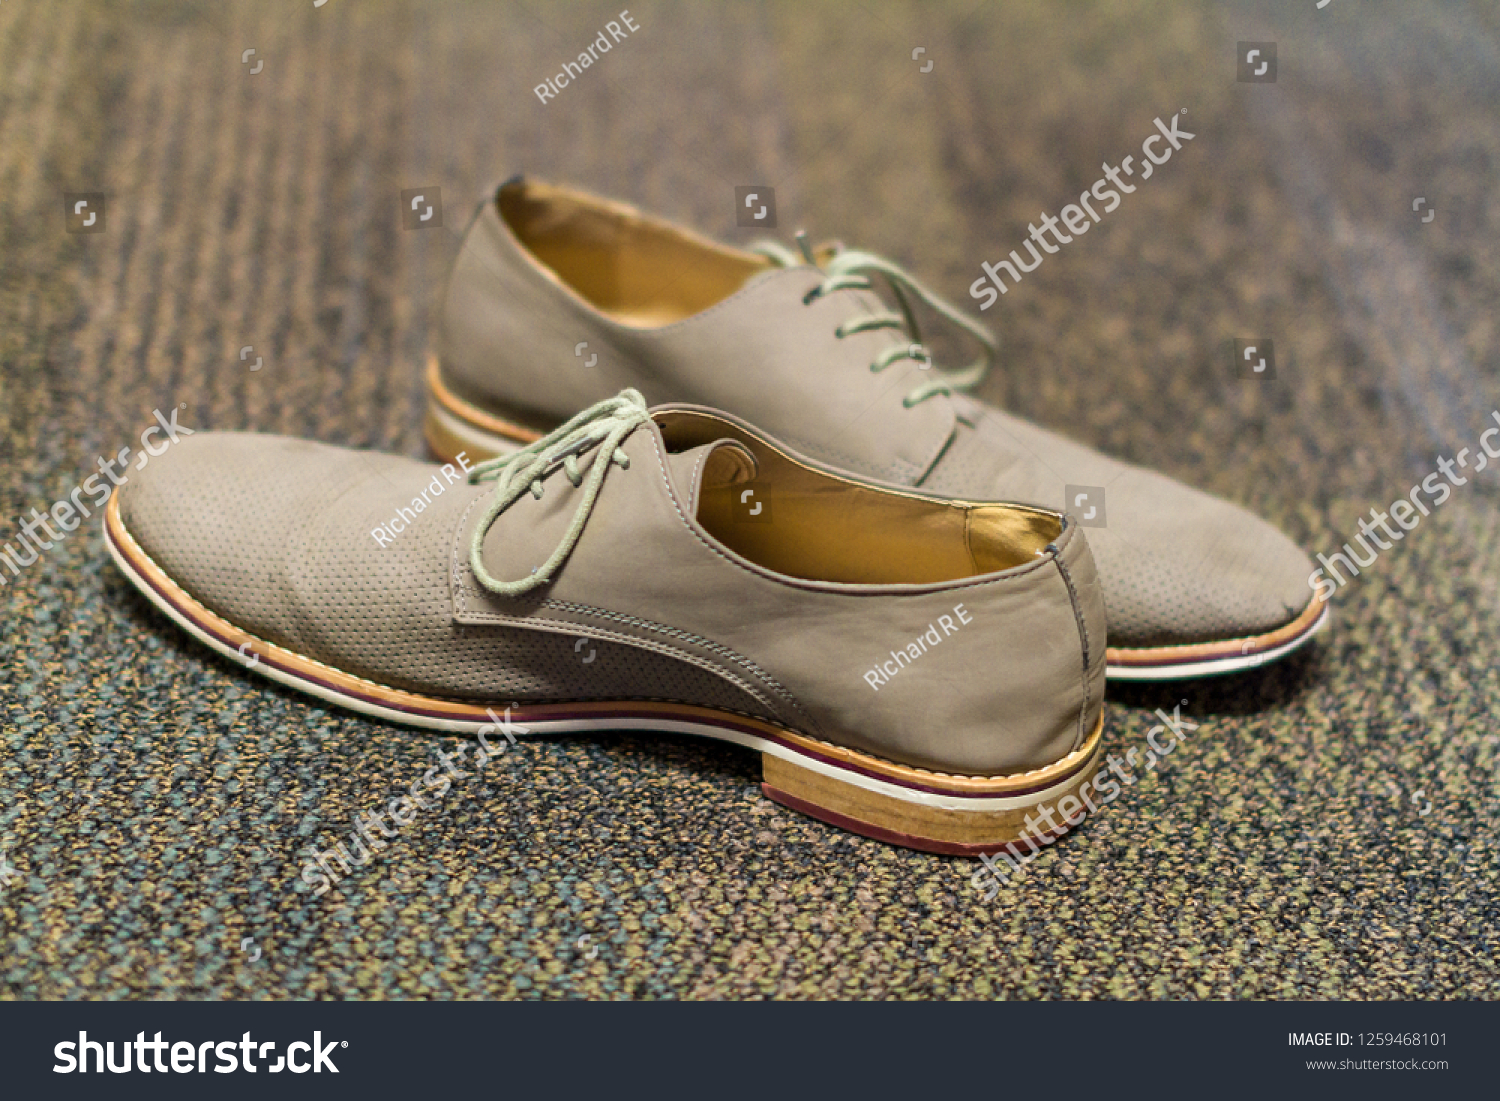 Light Colored Dress Shoes On Floor 